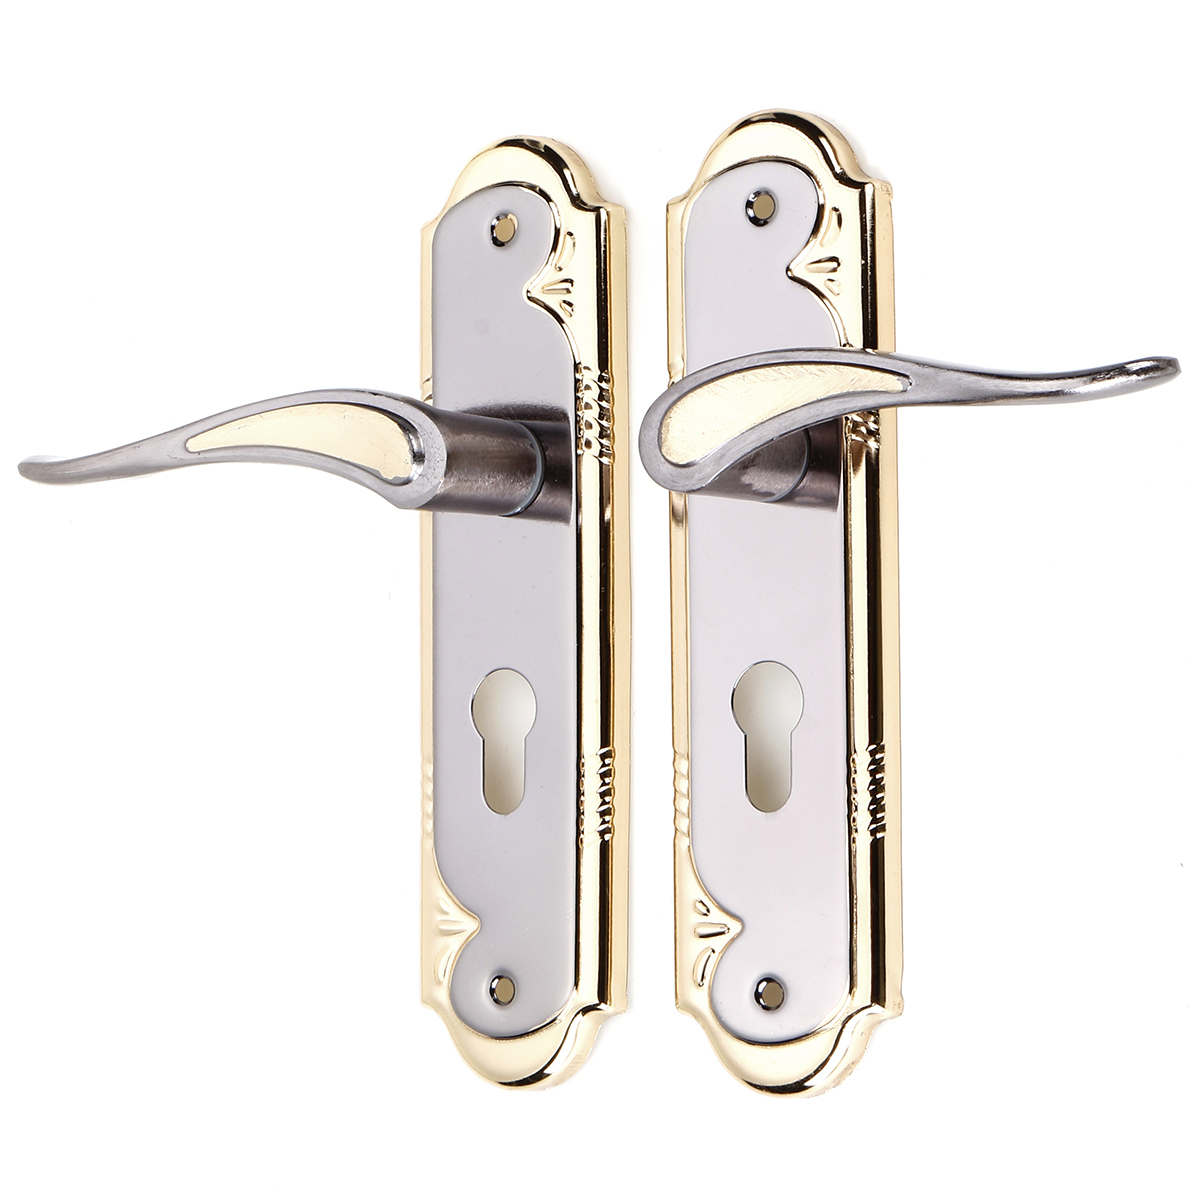 2-Set-Aluminum-Alloy-Dual-Latch-Door-Handle-Front-Back-Lever-Security-Lock-Cylinder-with-Key-1409221